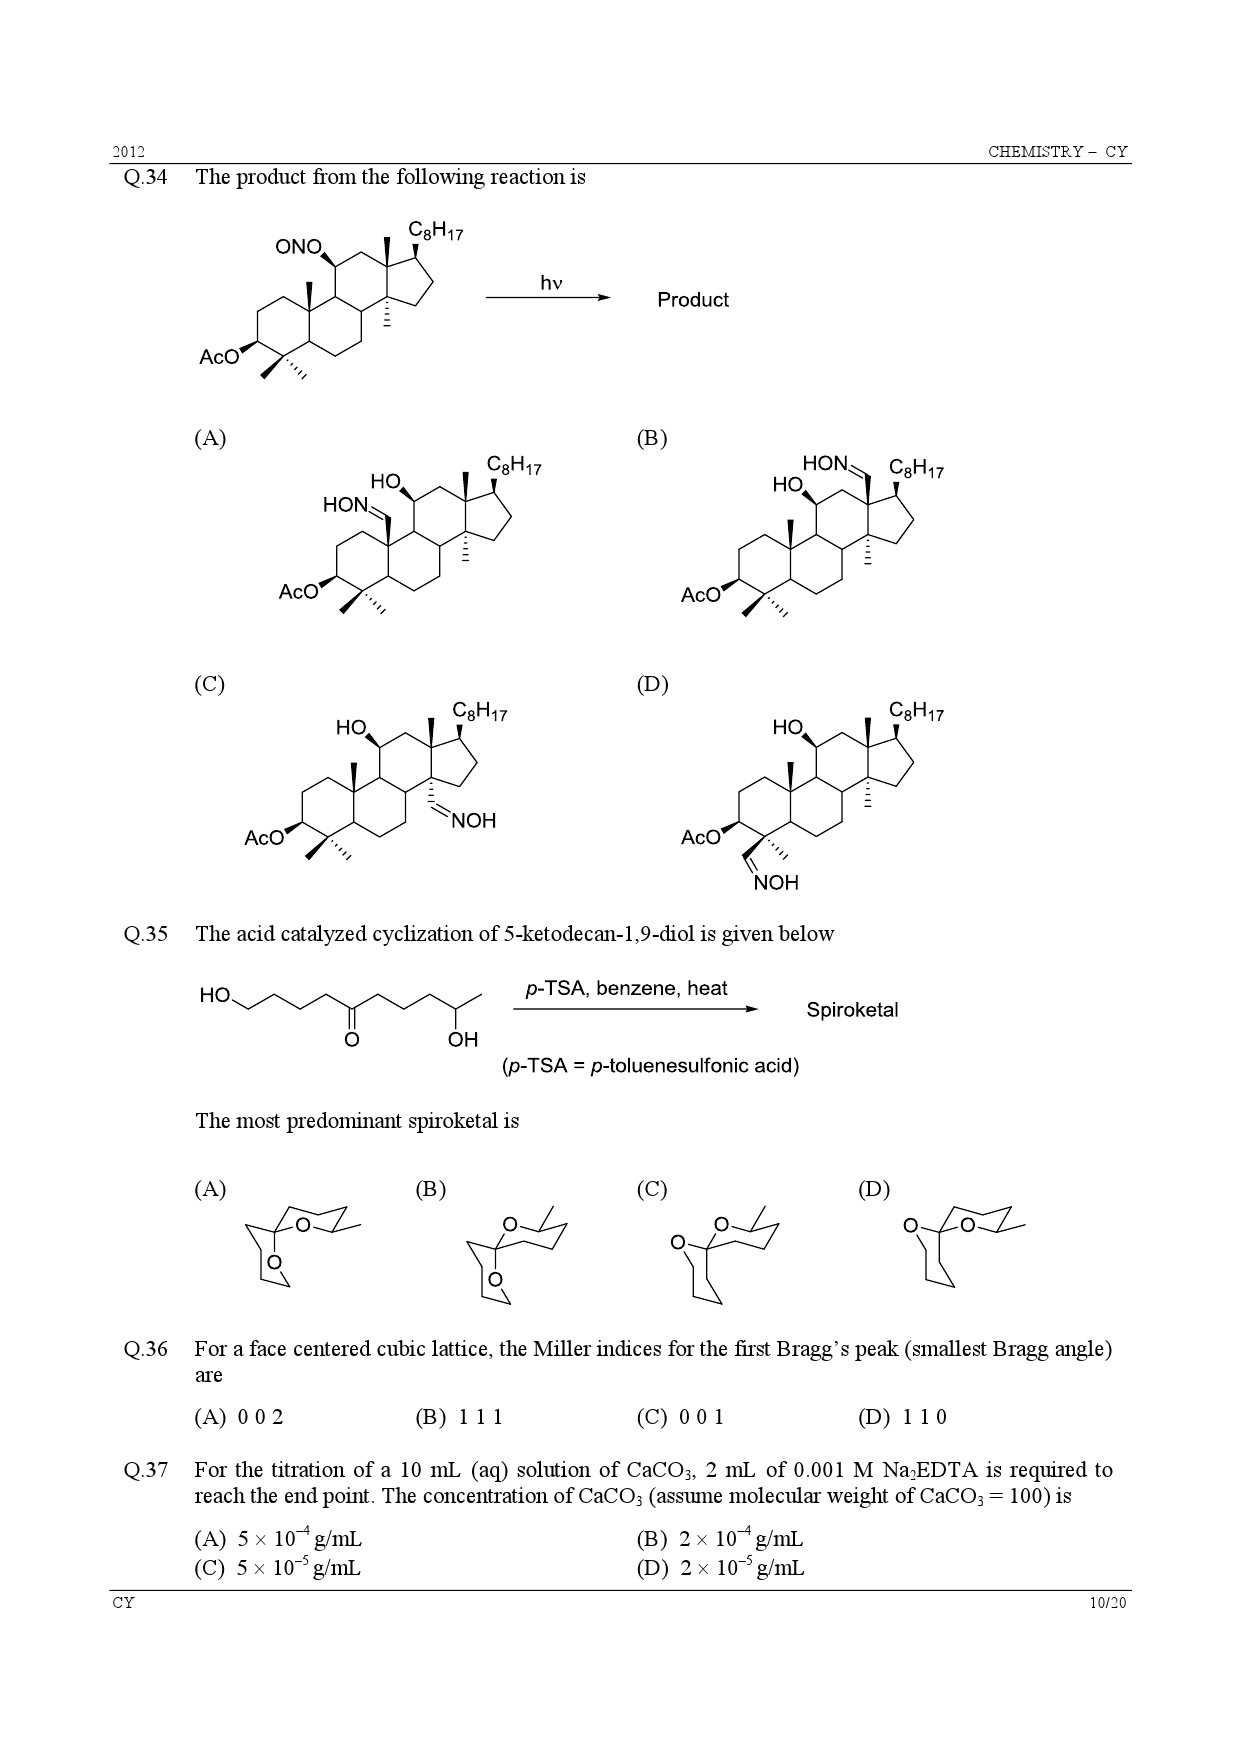 GATE Exam Question Paper 2012 Chemistry 10